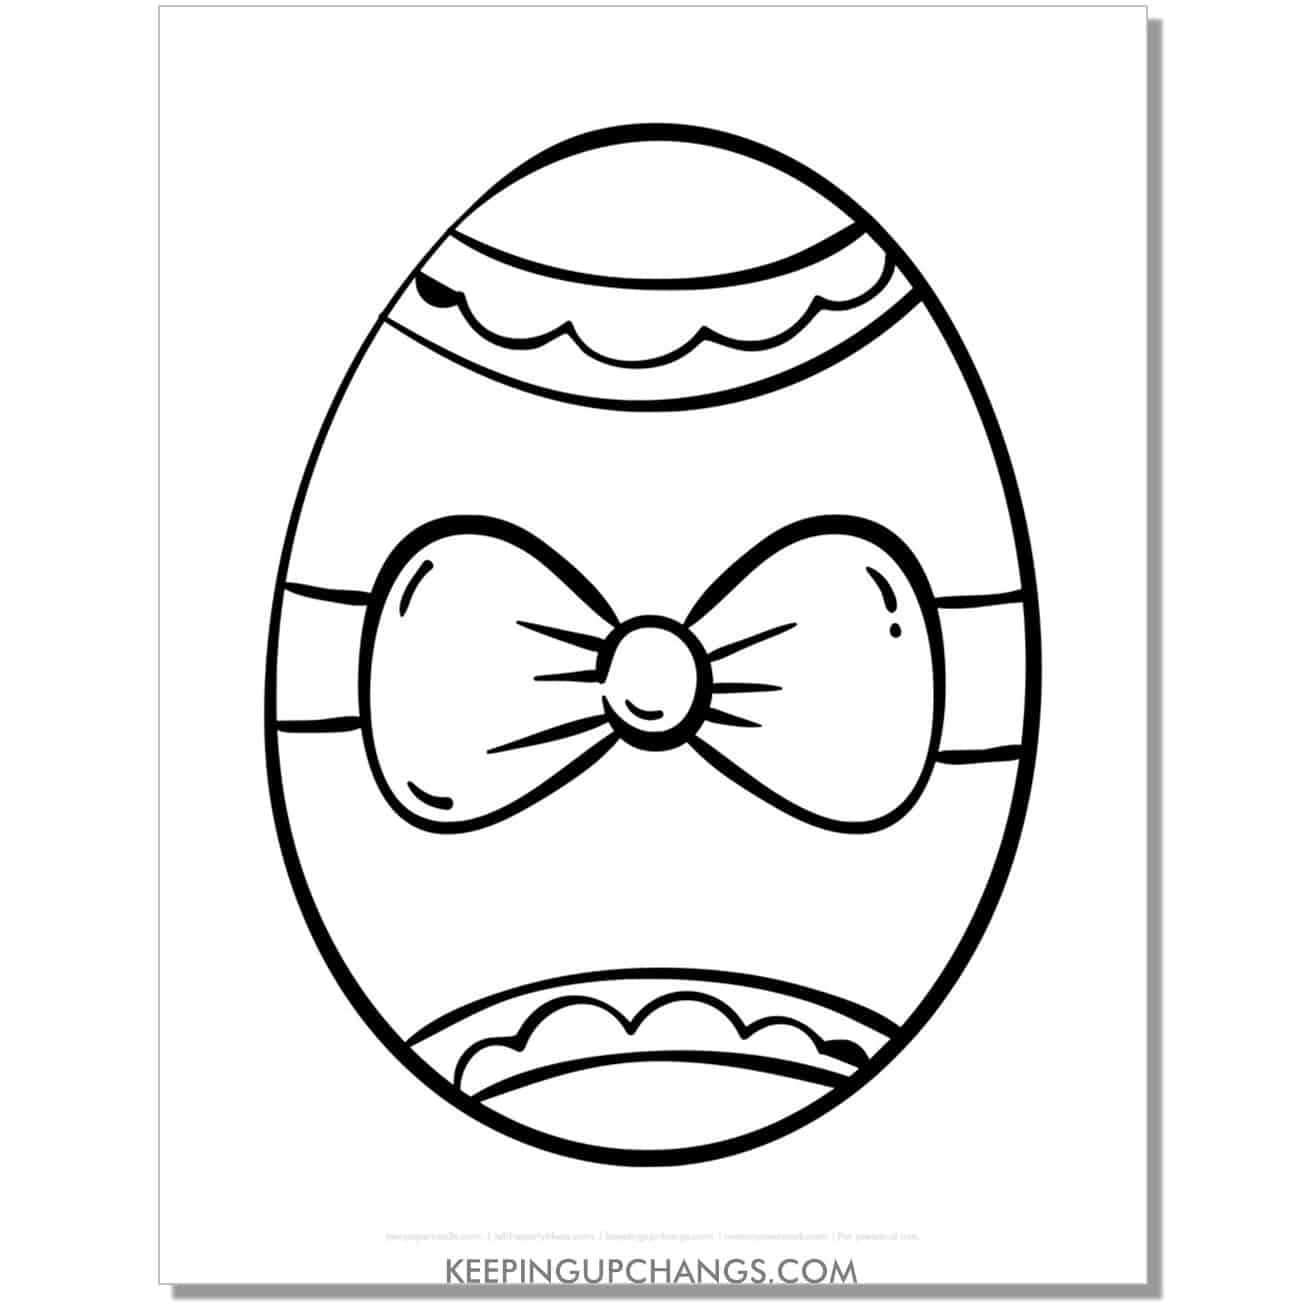 free large easter egg with bow coloring page, sheet.